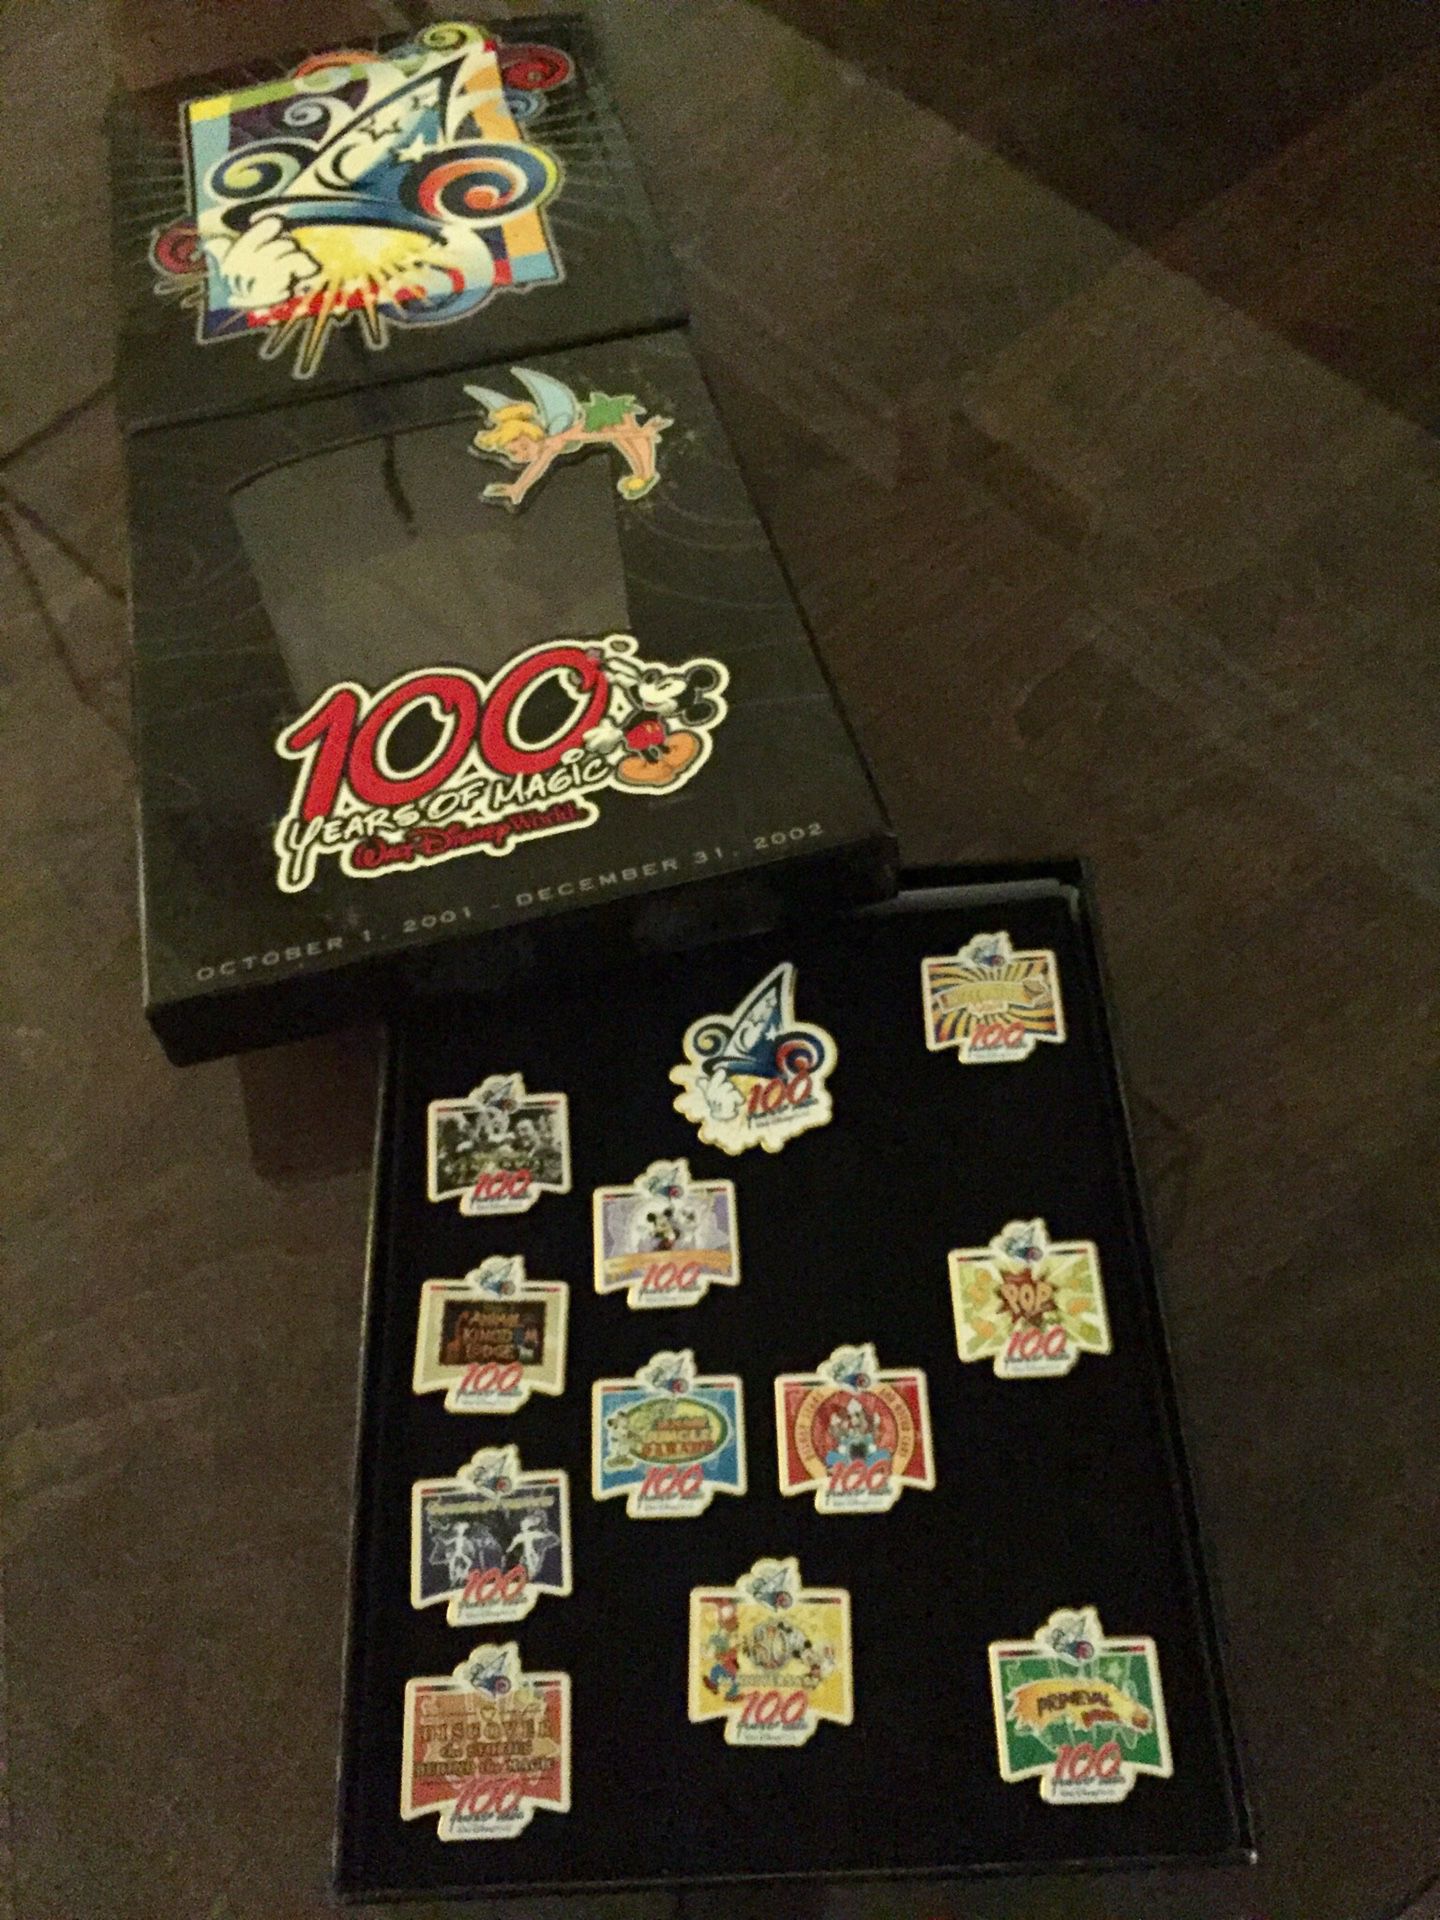 Disney 100 Years of Magic Press Event Pin Collection